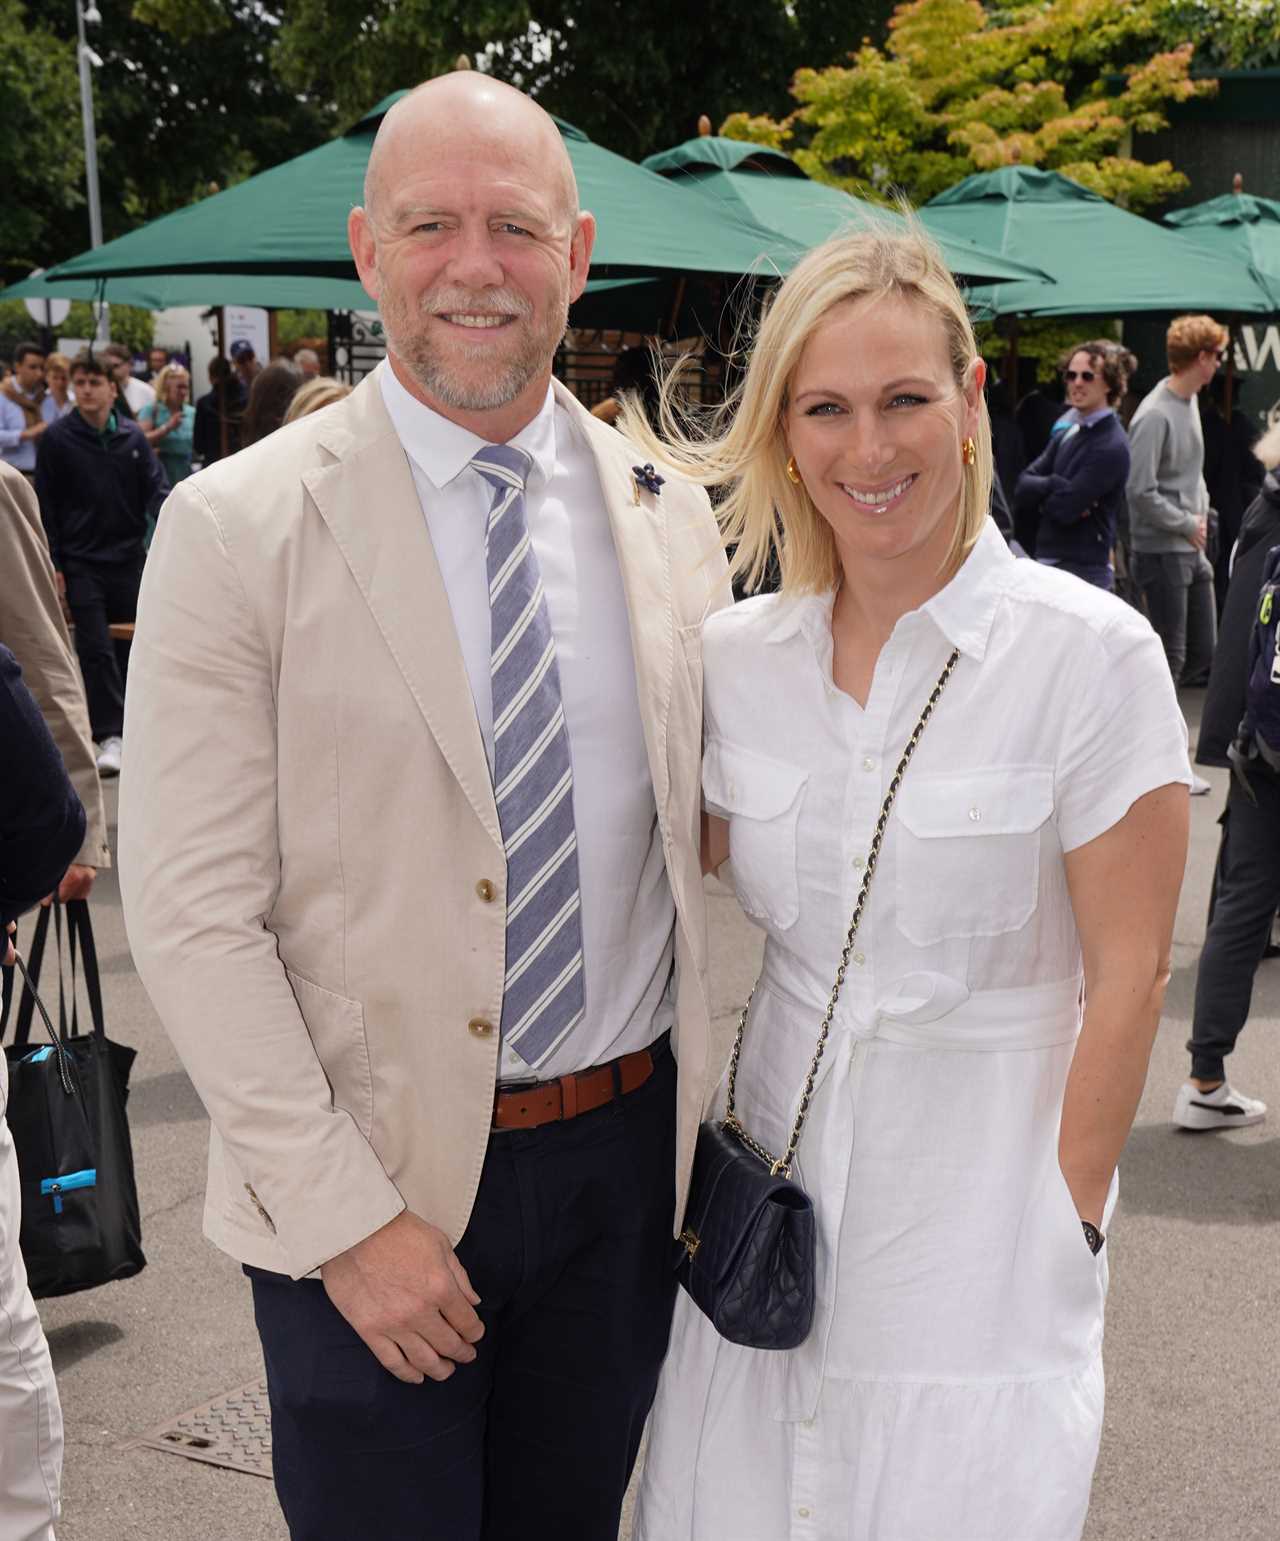 Mike Tindall reveals discussions with the Royal Family before joining I’m A Celeb jungle